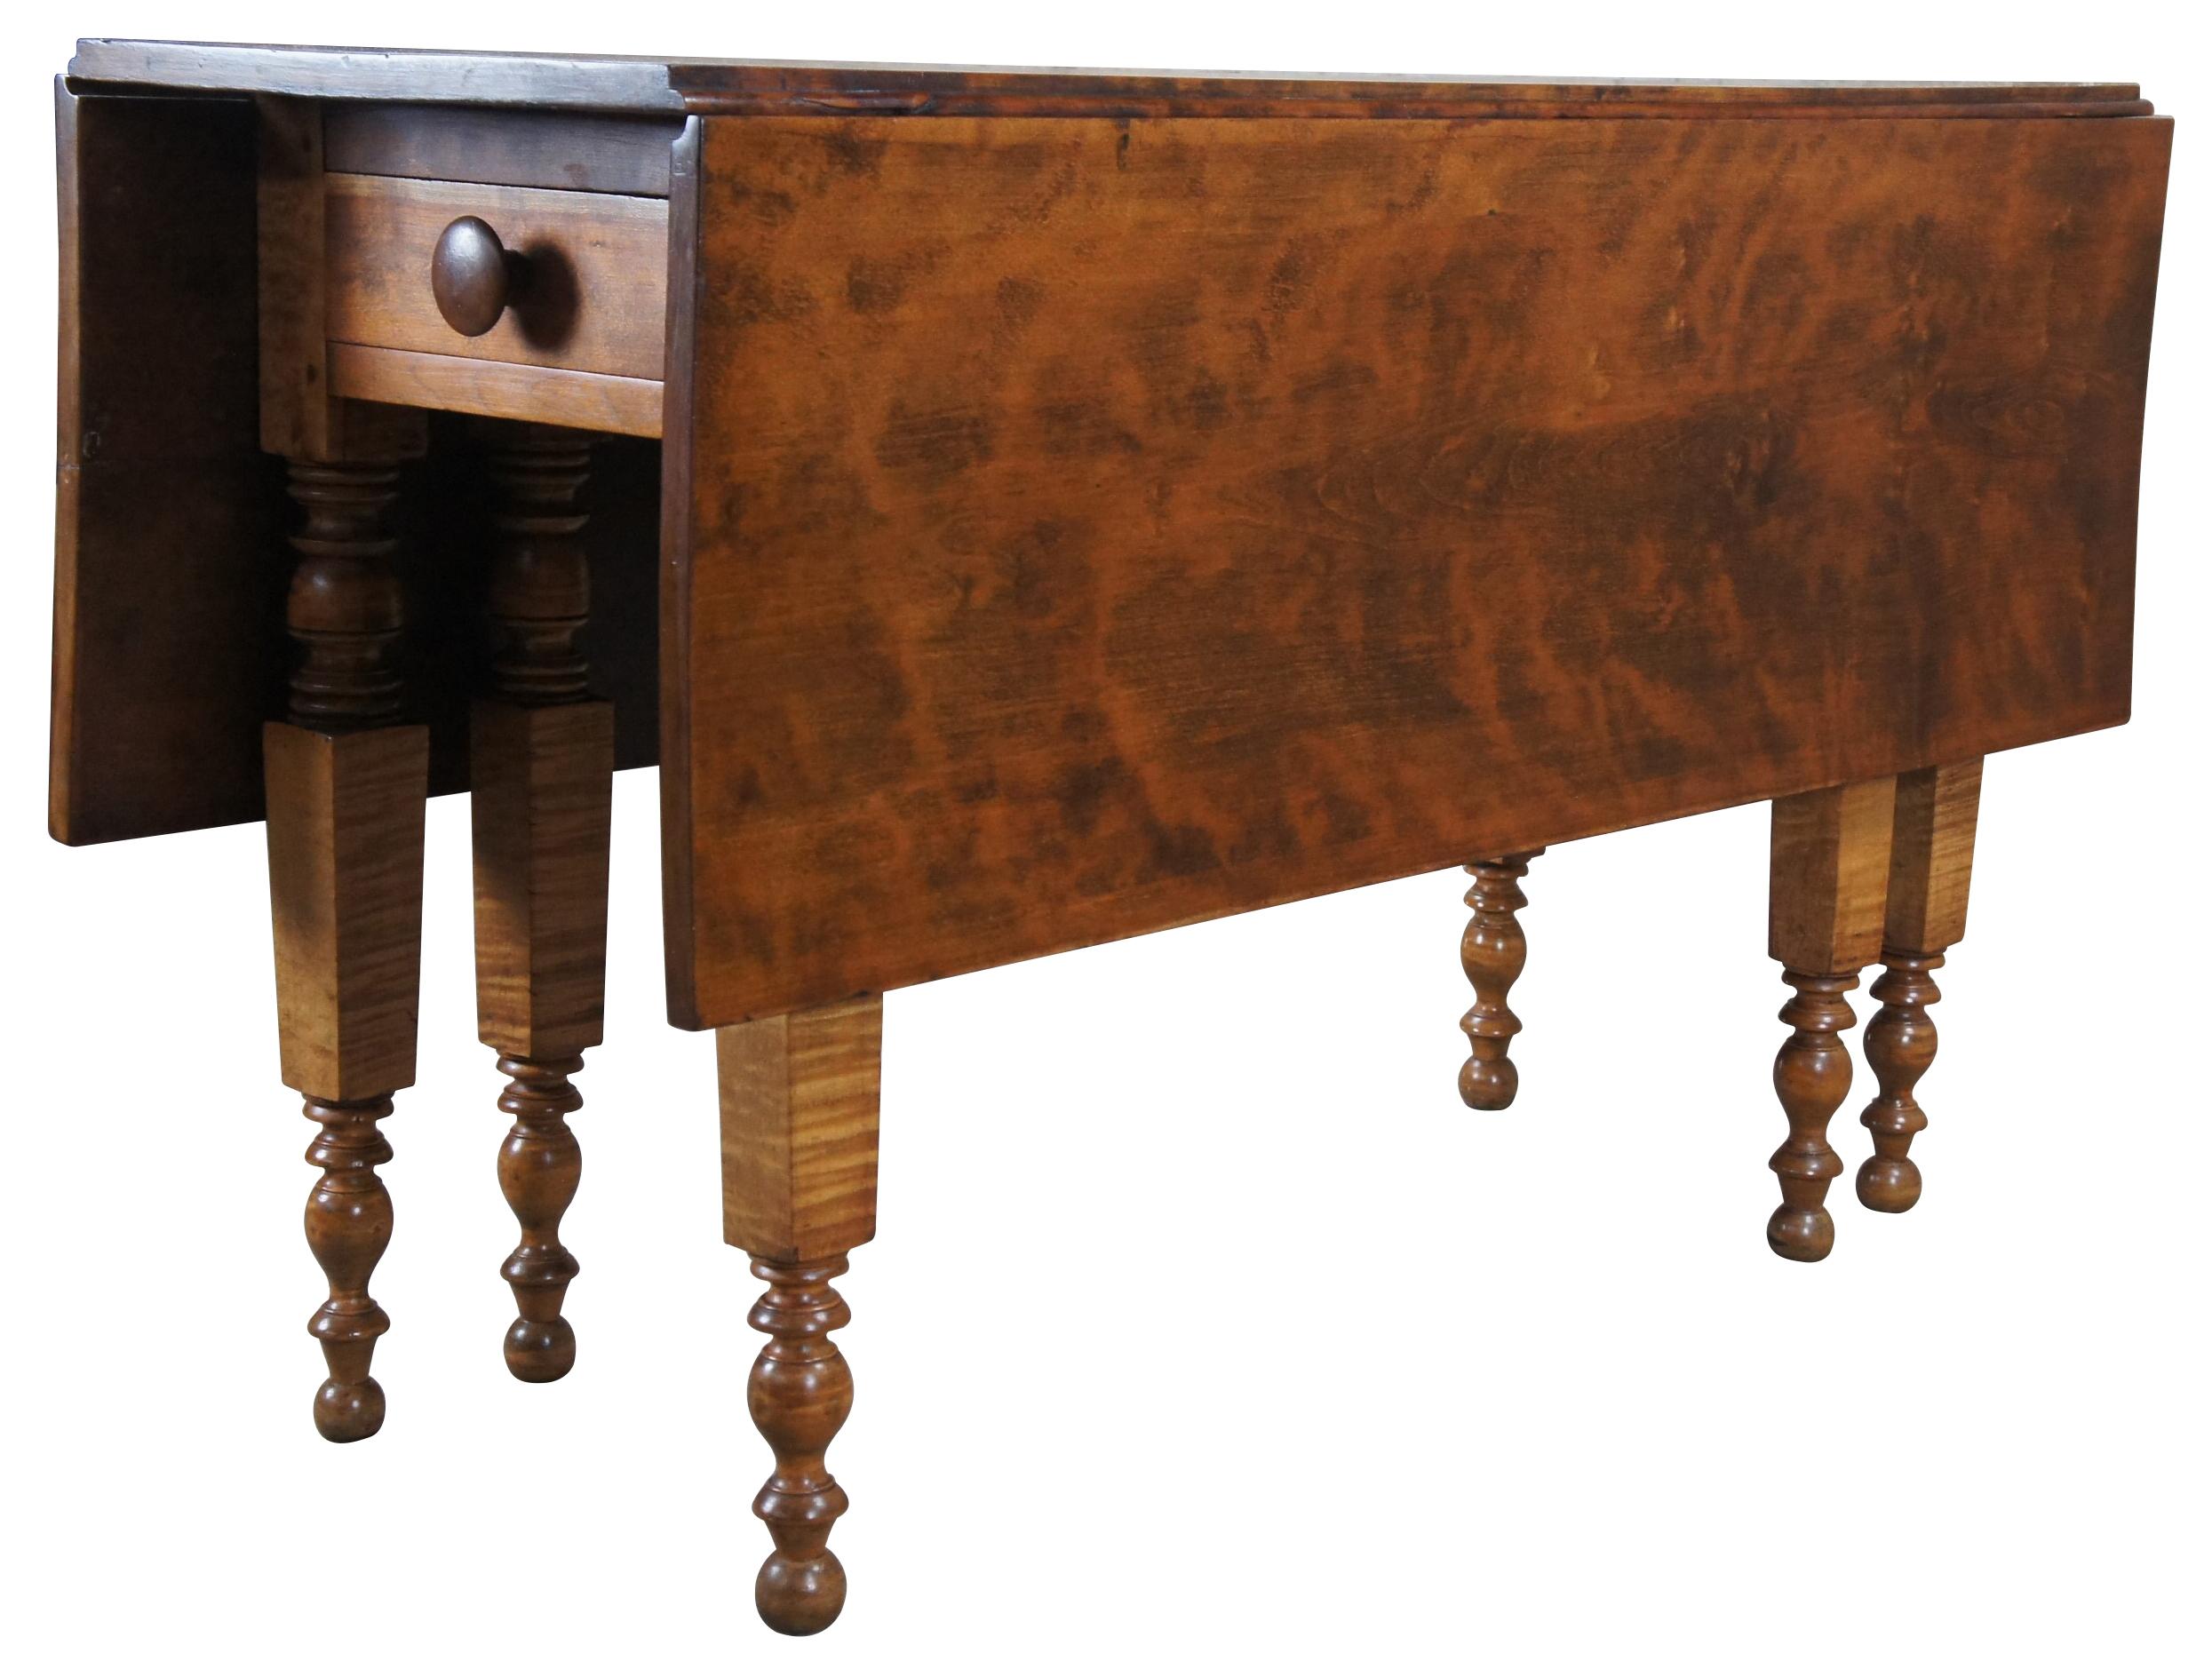 An impressive 19th century American gate leg table. Made from a beautiful curly (tiger) maple with hand turned legs and a drawer along the front. Great for use as a dining table or hallway console.

Measures: 48